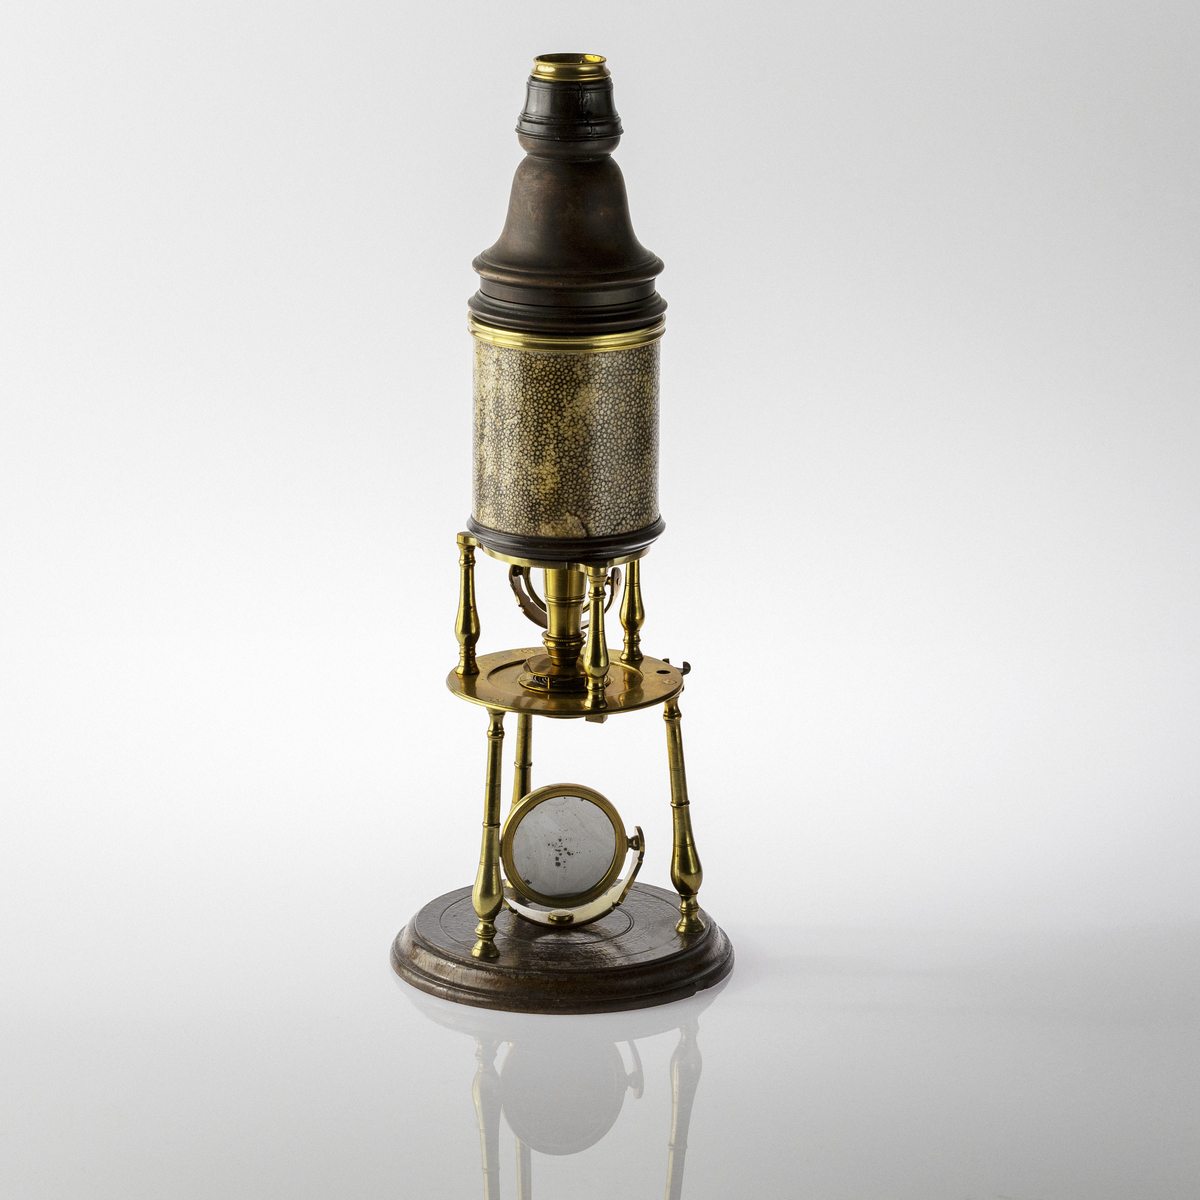 Microscopes with visible light were enough to be able to see and examine cells and their structure. This was purchased at an auction in Örebro in 1878. According to information, the microscope belonged to pharmacist Scheele in Köping.